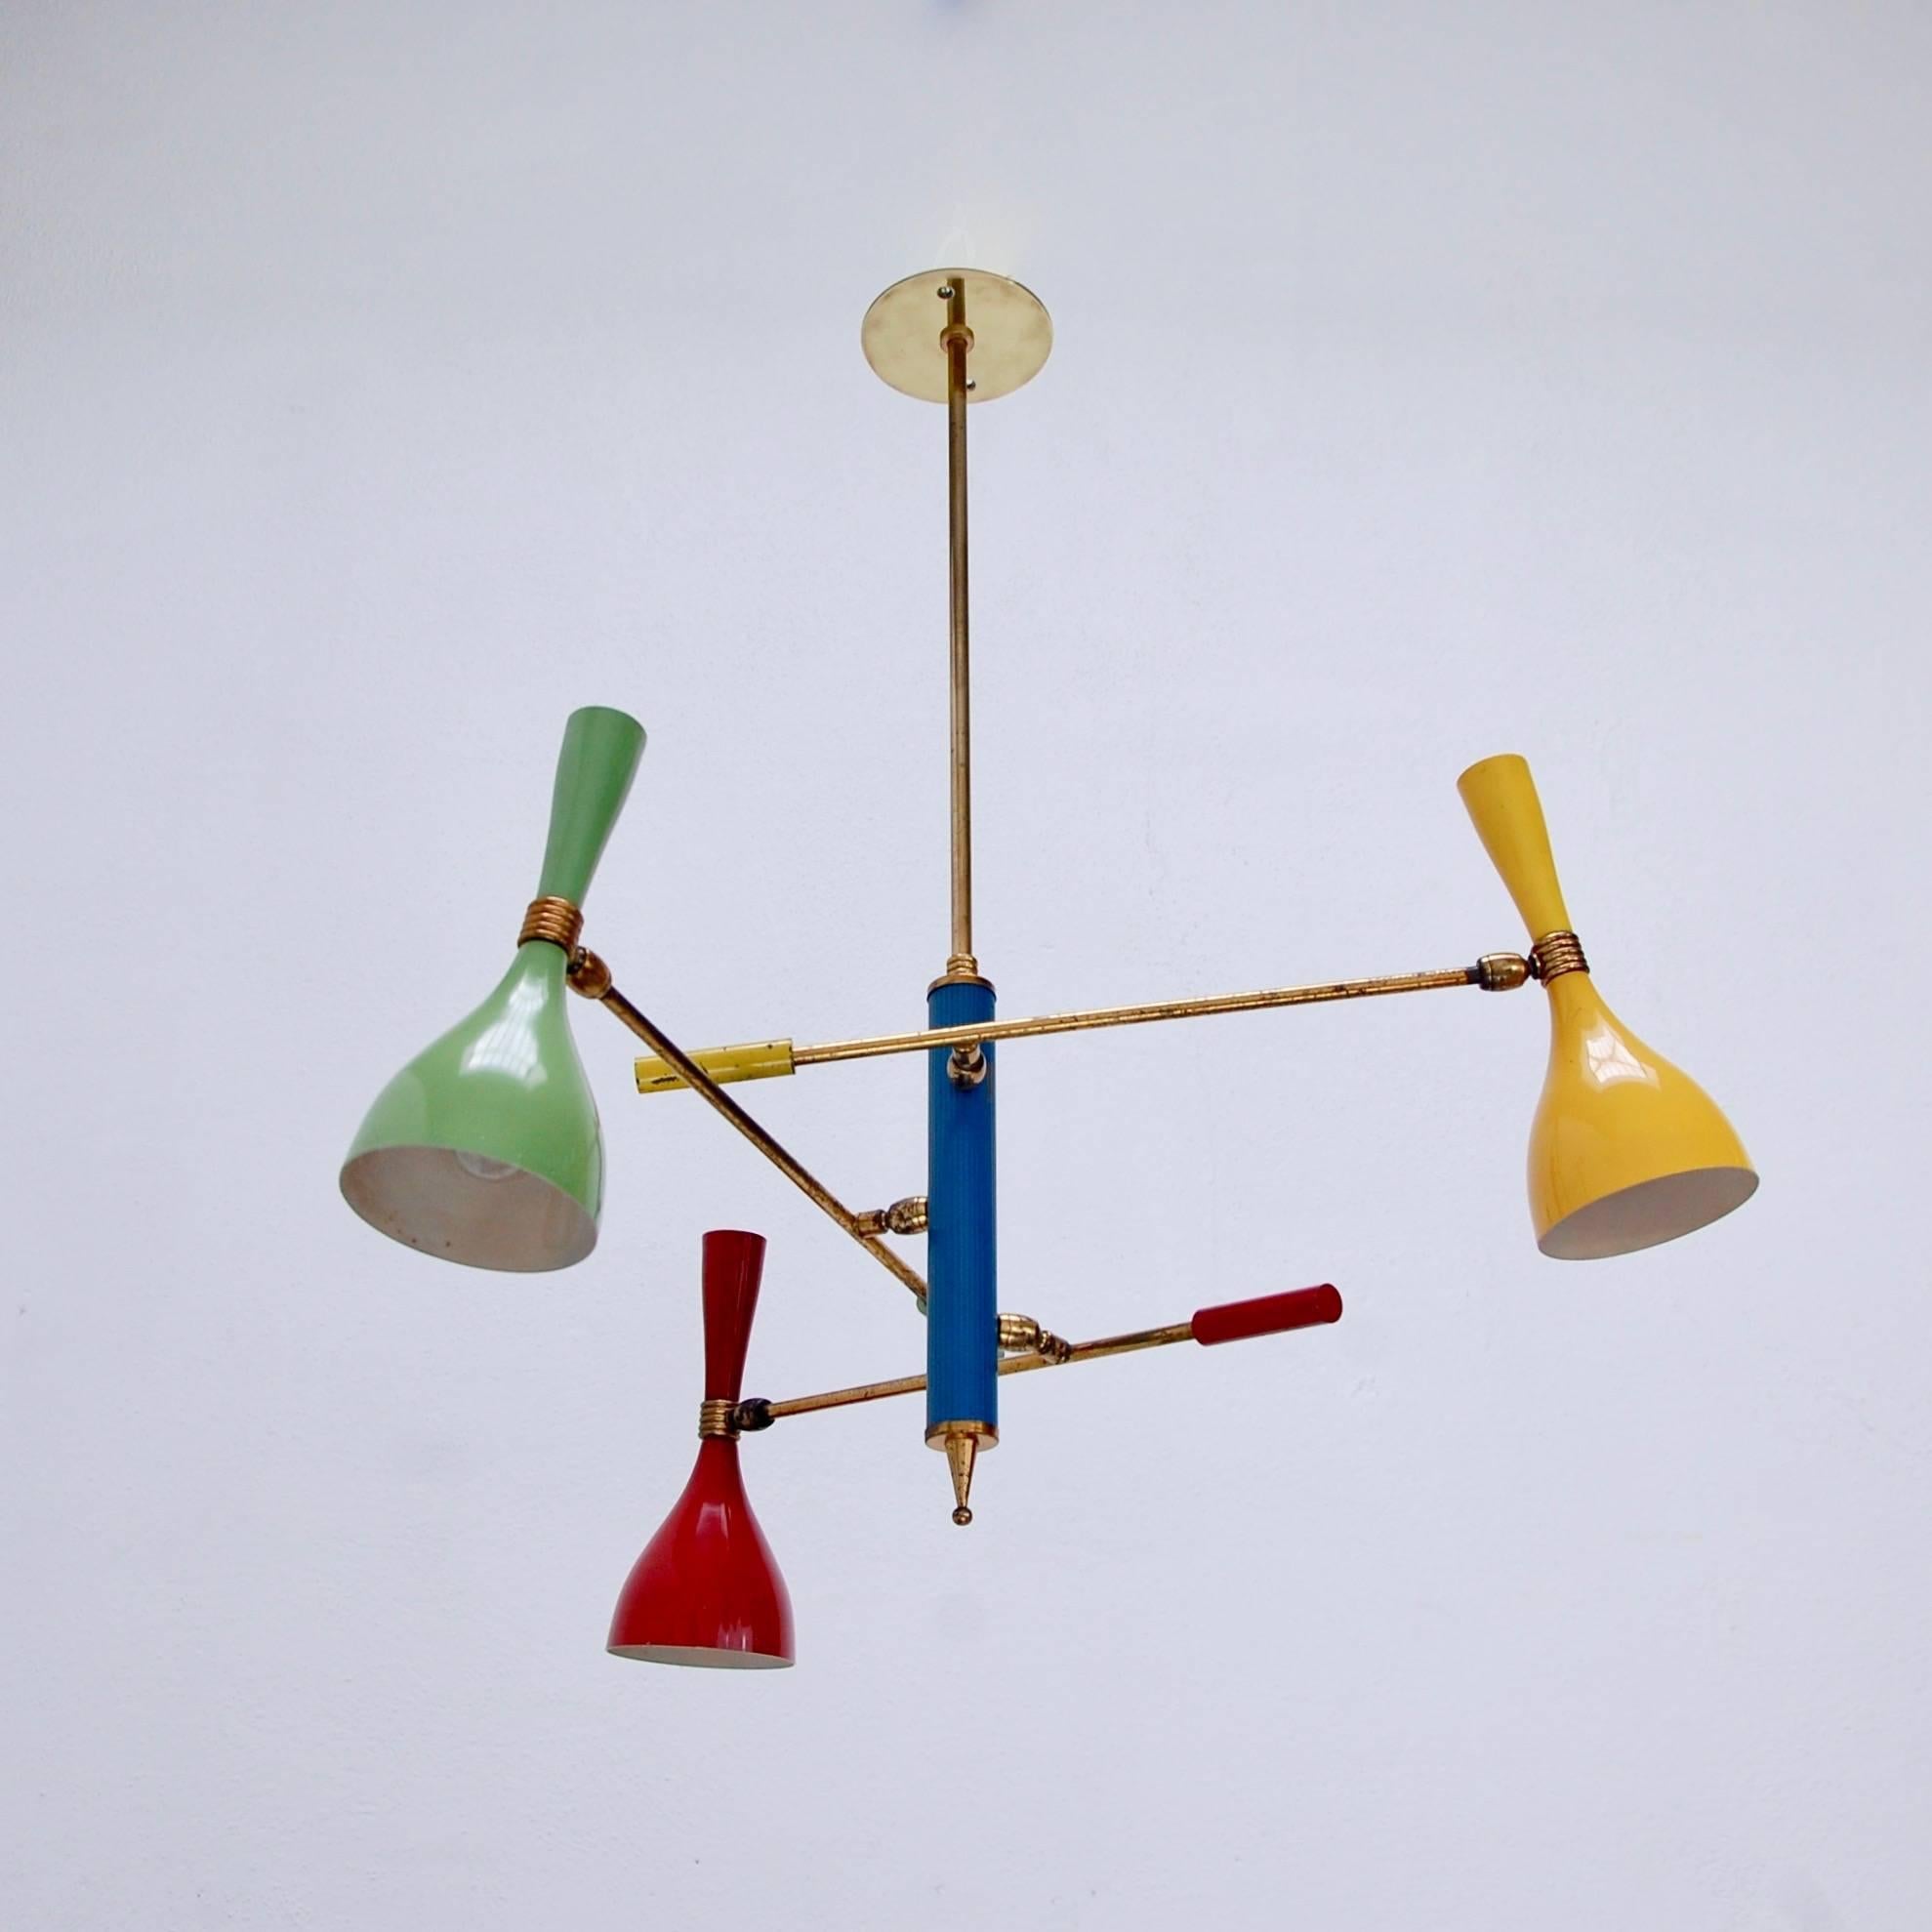 Classic of the period midcentury Italian multicolored three-shade chandelier by Arredoluce, 1950s, Italy. Single candelabra E12 based socket per articulating shade. Original paint and finish.
Measures: Diameter 22”
Shade height 8.5”
OAD: